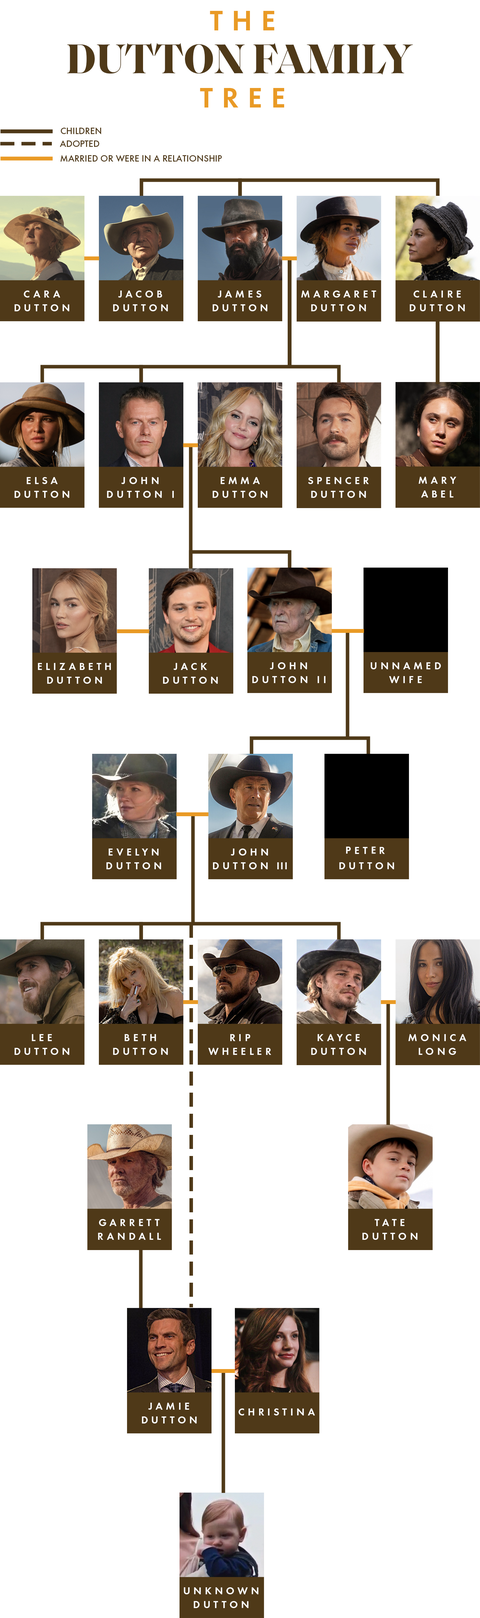 the-dutton-family-tree-yellowstone-1923-1883-character-guide